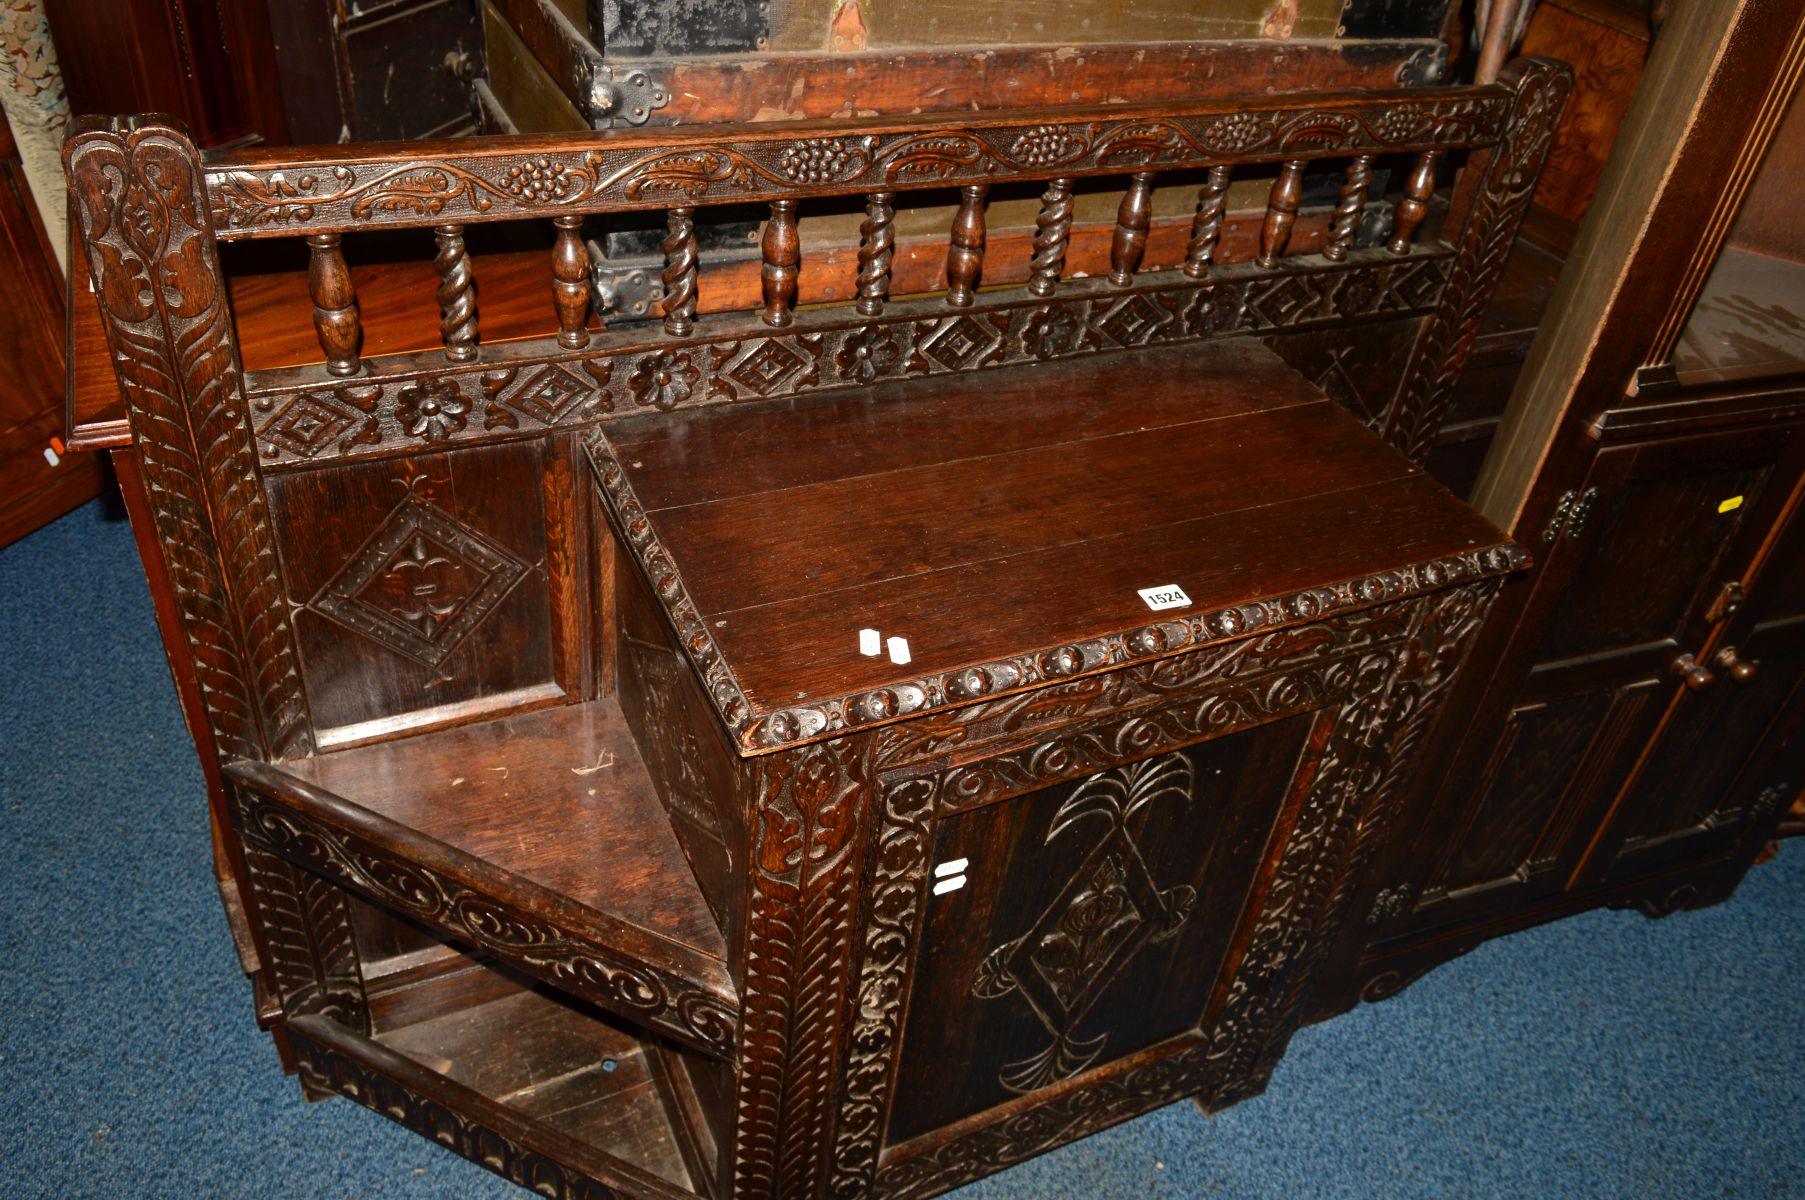 AN EARLY 20TH CENTURY OAK CANTED HALL STAND, carved with grapes, foliage and geometric decoration,